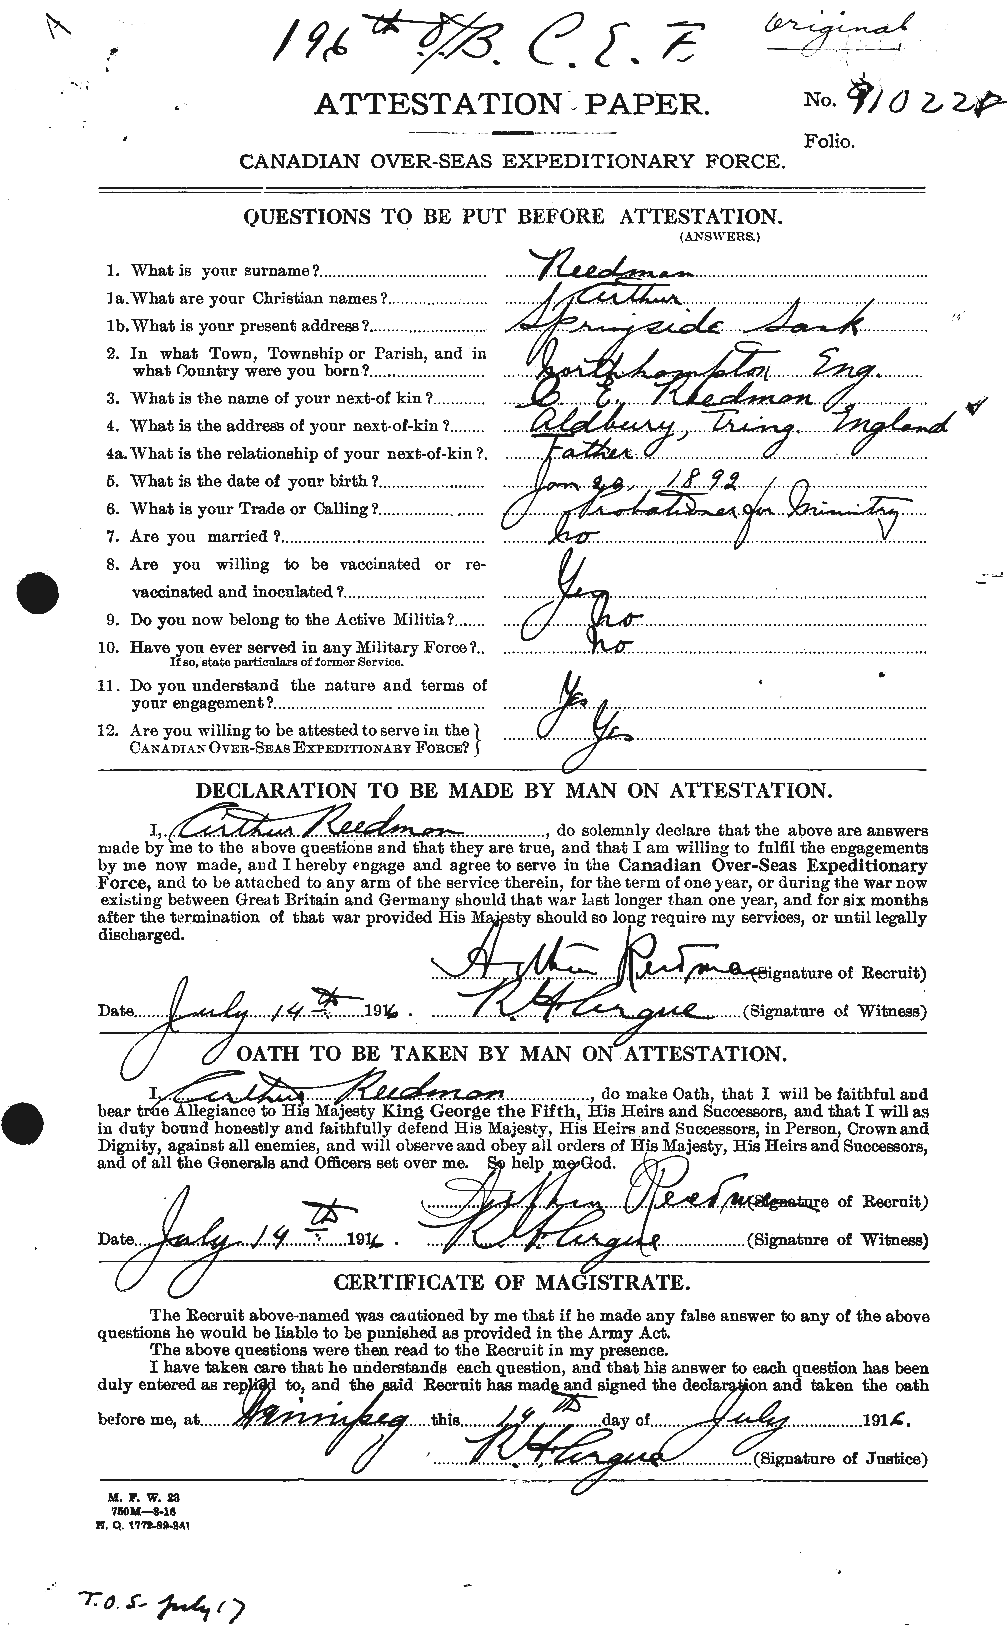 Personnel Records of the First World War - CEF 596583a